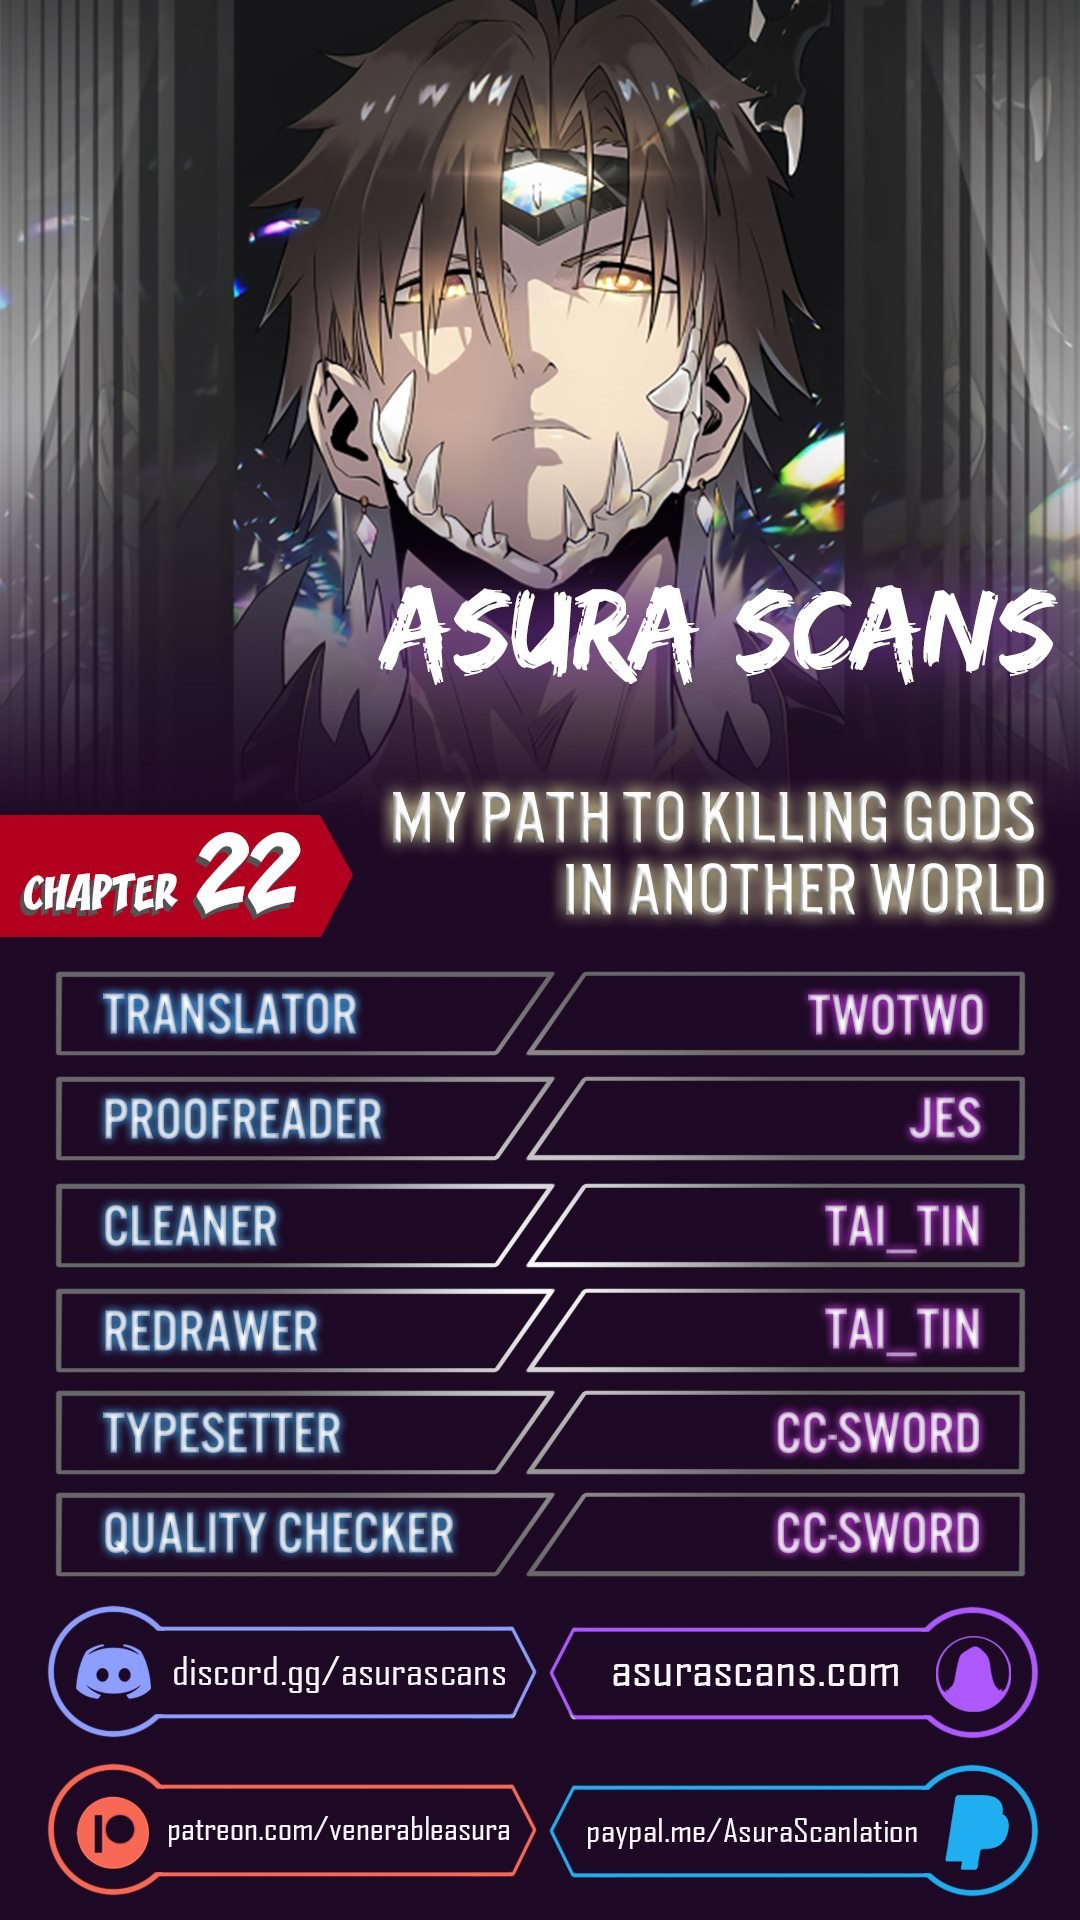 My Path to Killing Gods in Another World - Chapter 23173 - Image 1